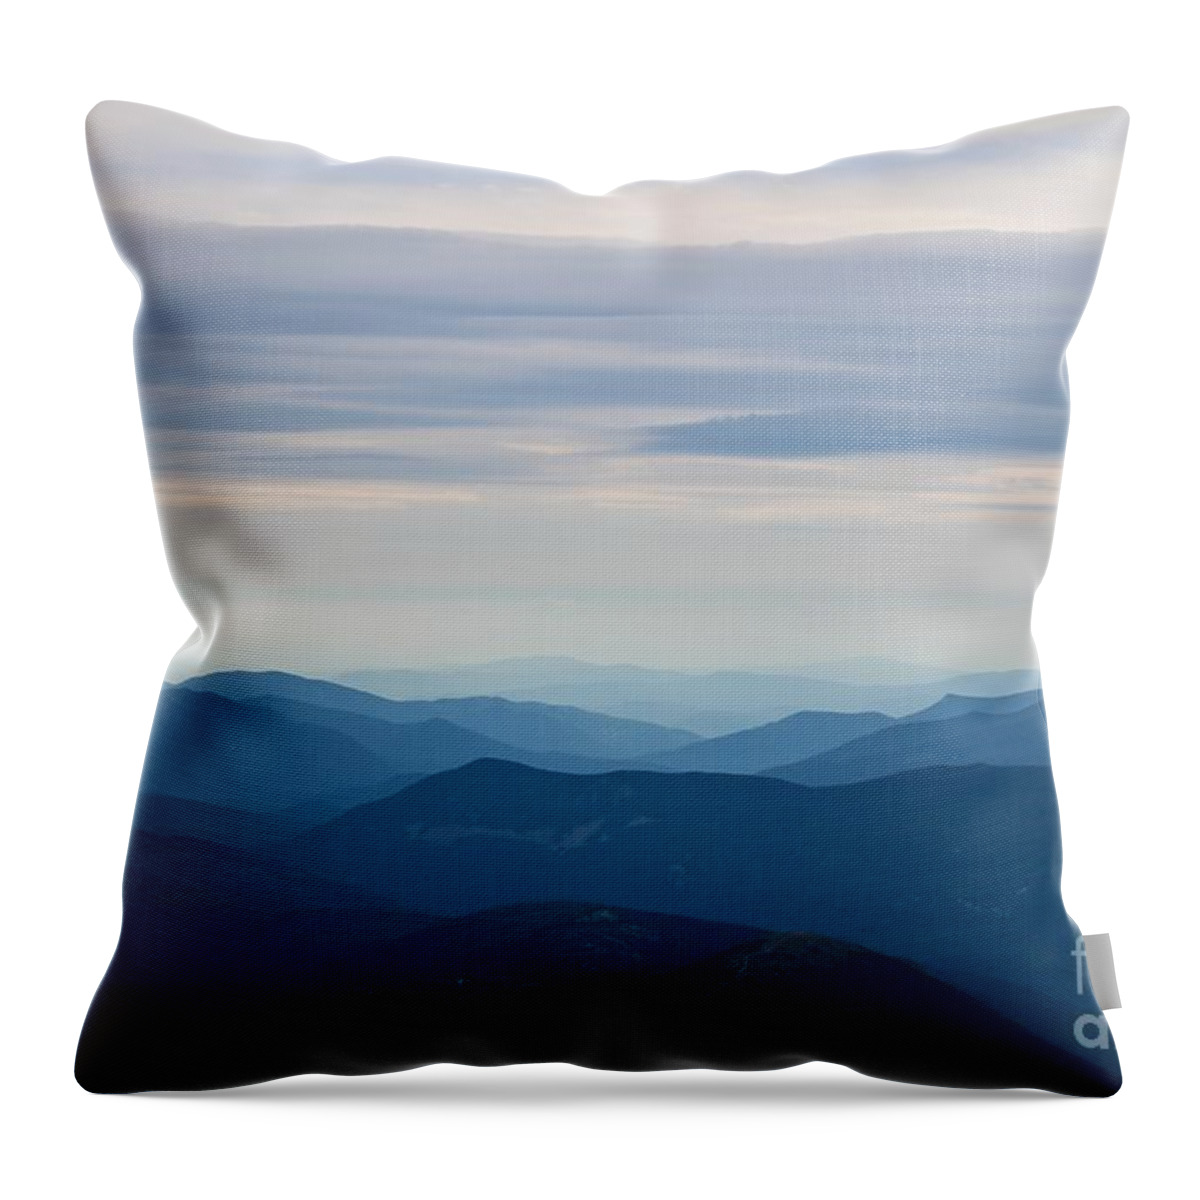 Mt. Washington Throw Pillow featuring the photograph Mt. Washington #10 by Deena Withycombe